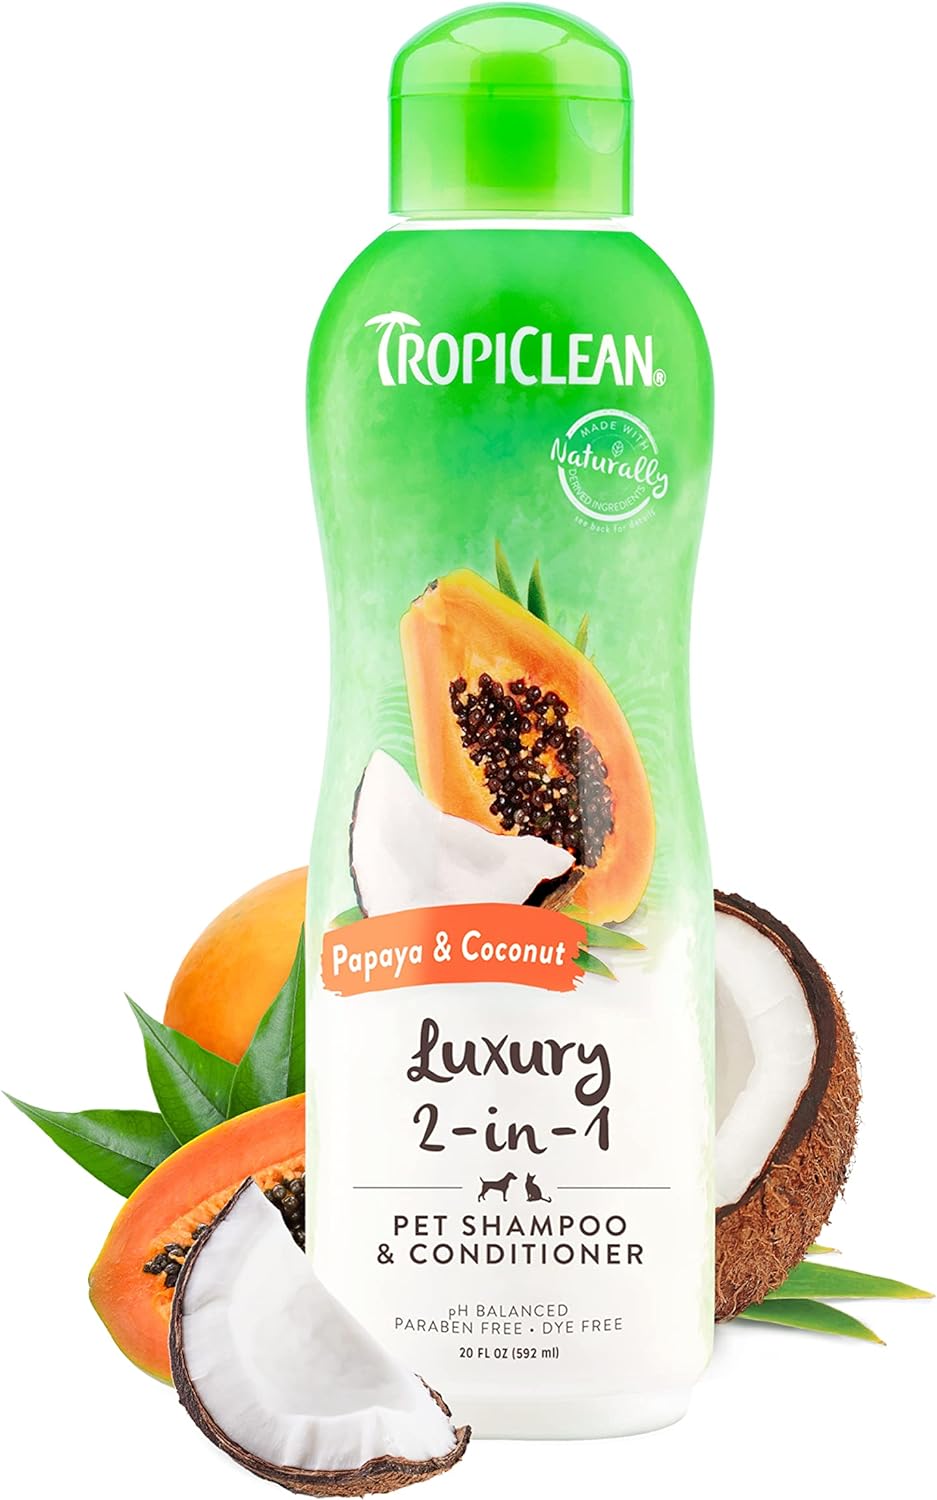 TropiClean 2-in-1 Papaya & Coconut Dog Shampoo and Conditioner